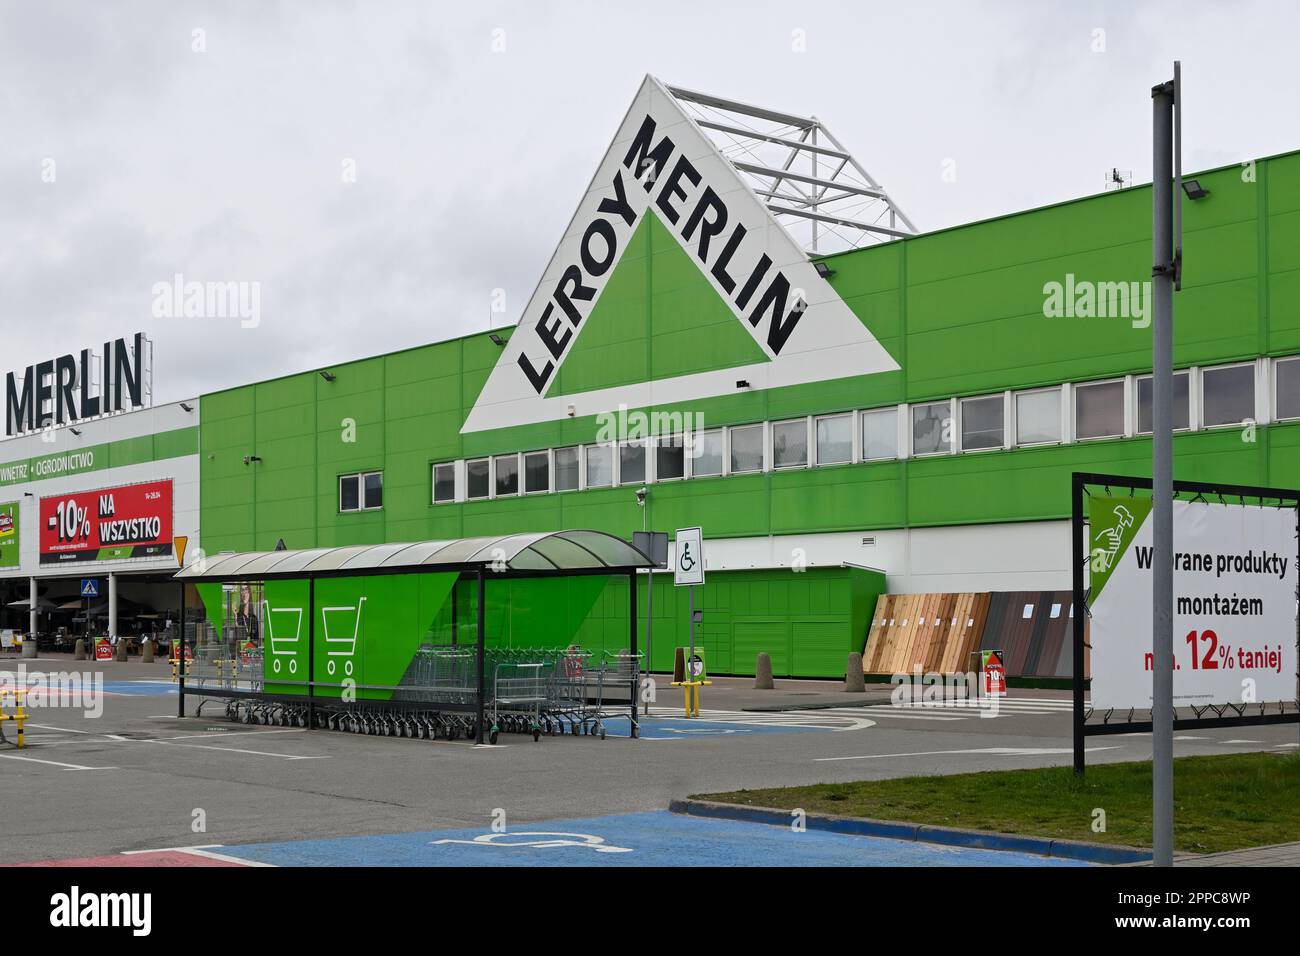 Rumia, Poland - April 16, 2023: Leroy Merlin logo on the facade of the store. Leroy Merlin is a French chain of hypermarkets in the construction indus Stock Photo